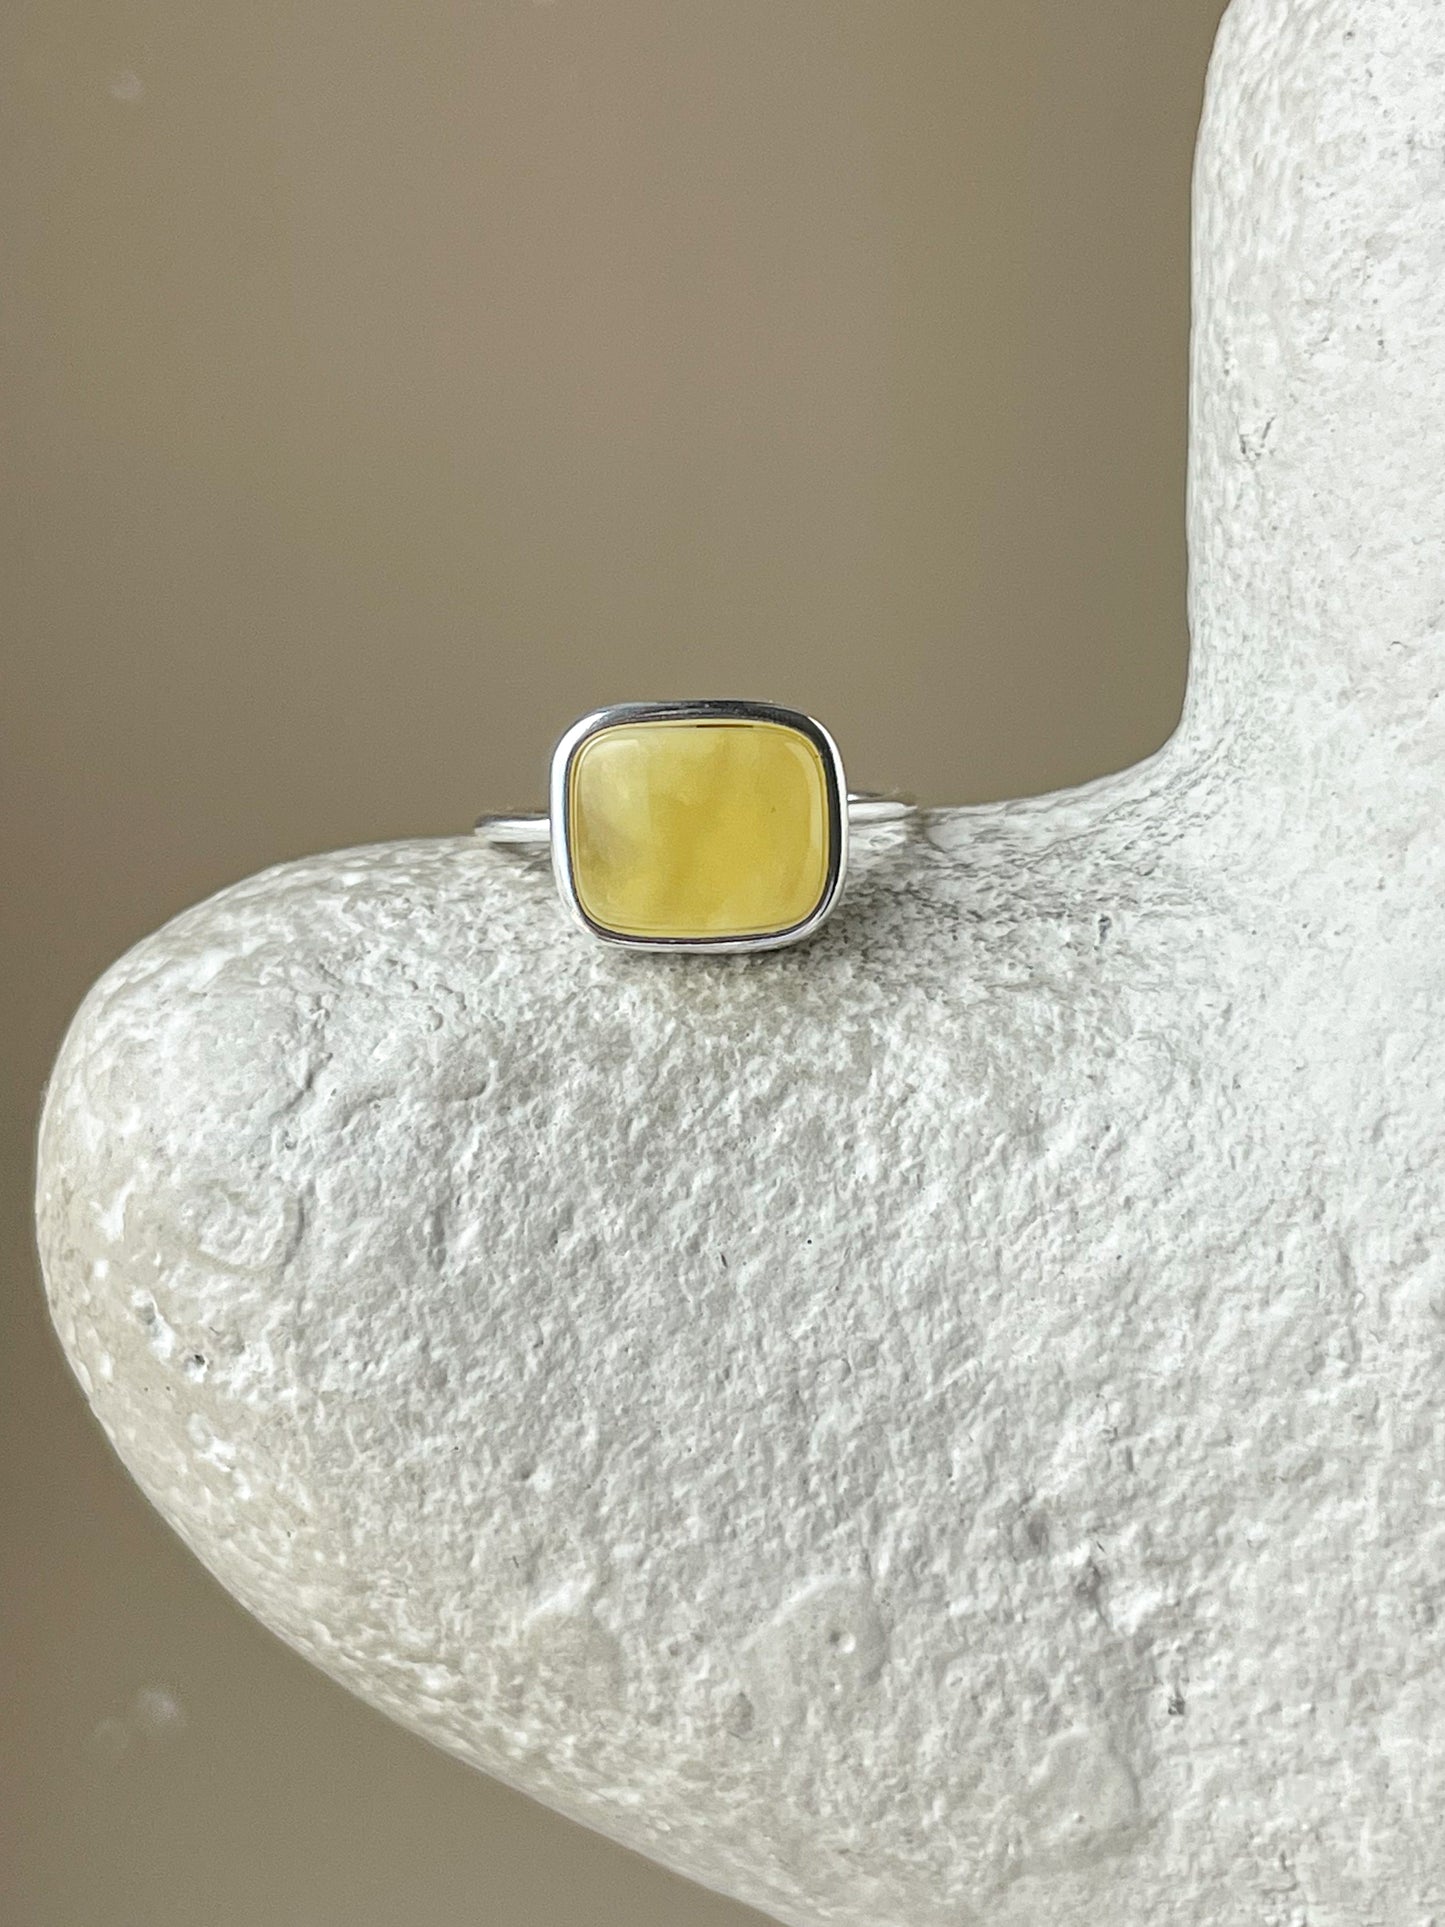 Matte amber ring- Sterling silver - Thin ring collection - Size 8 1/2